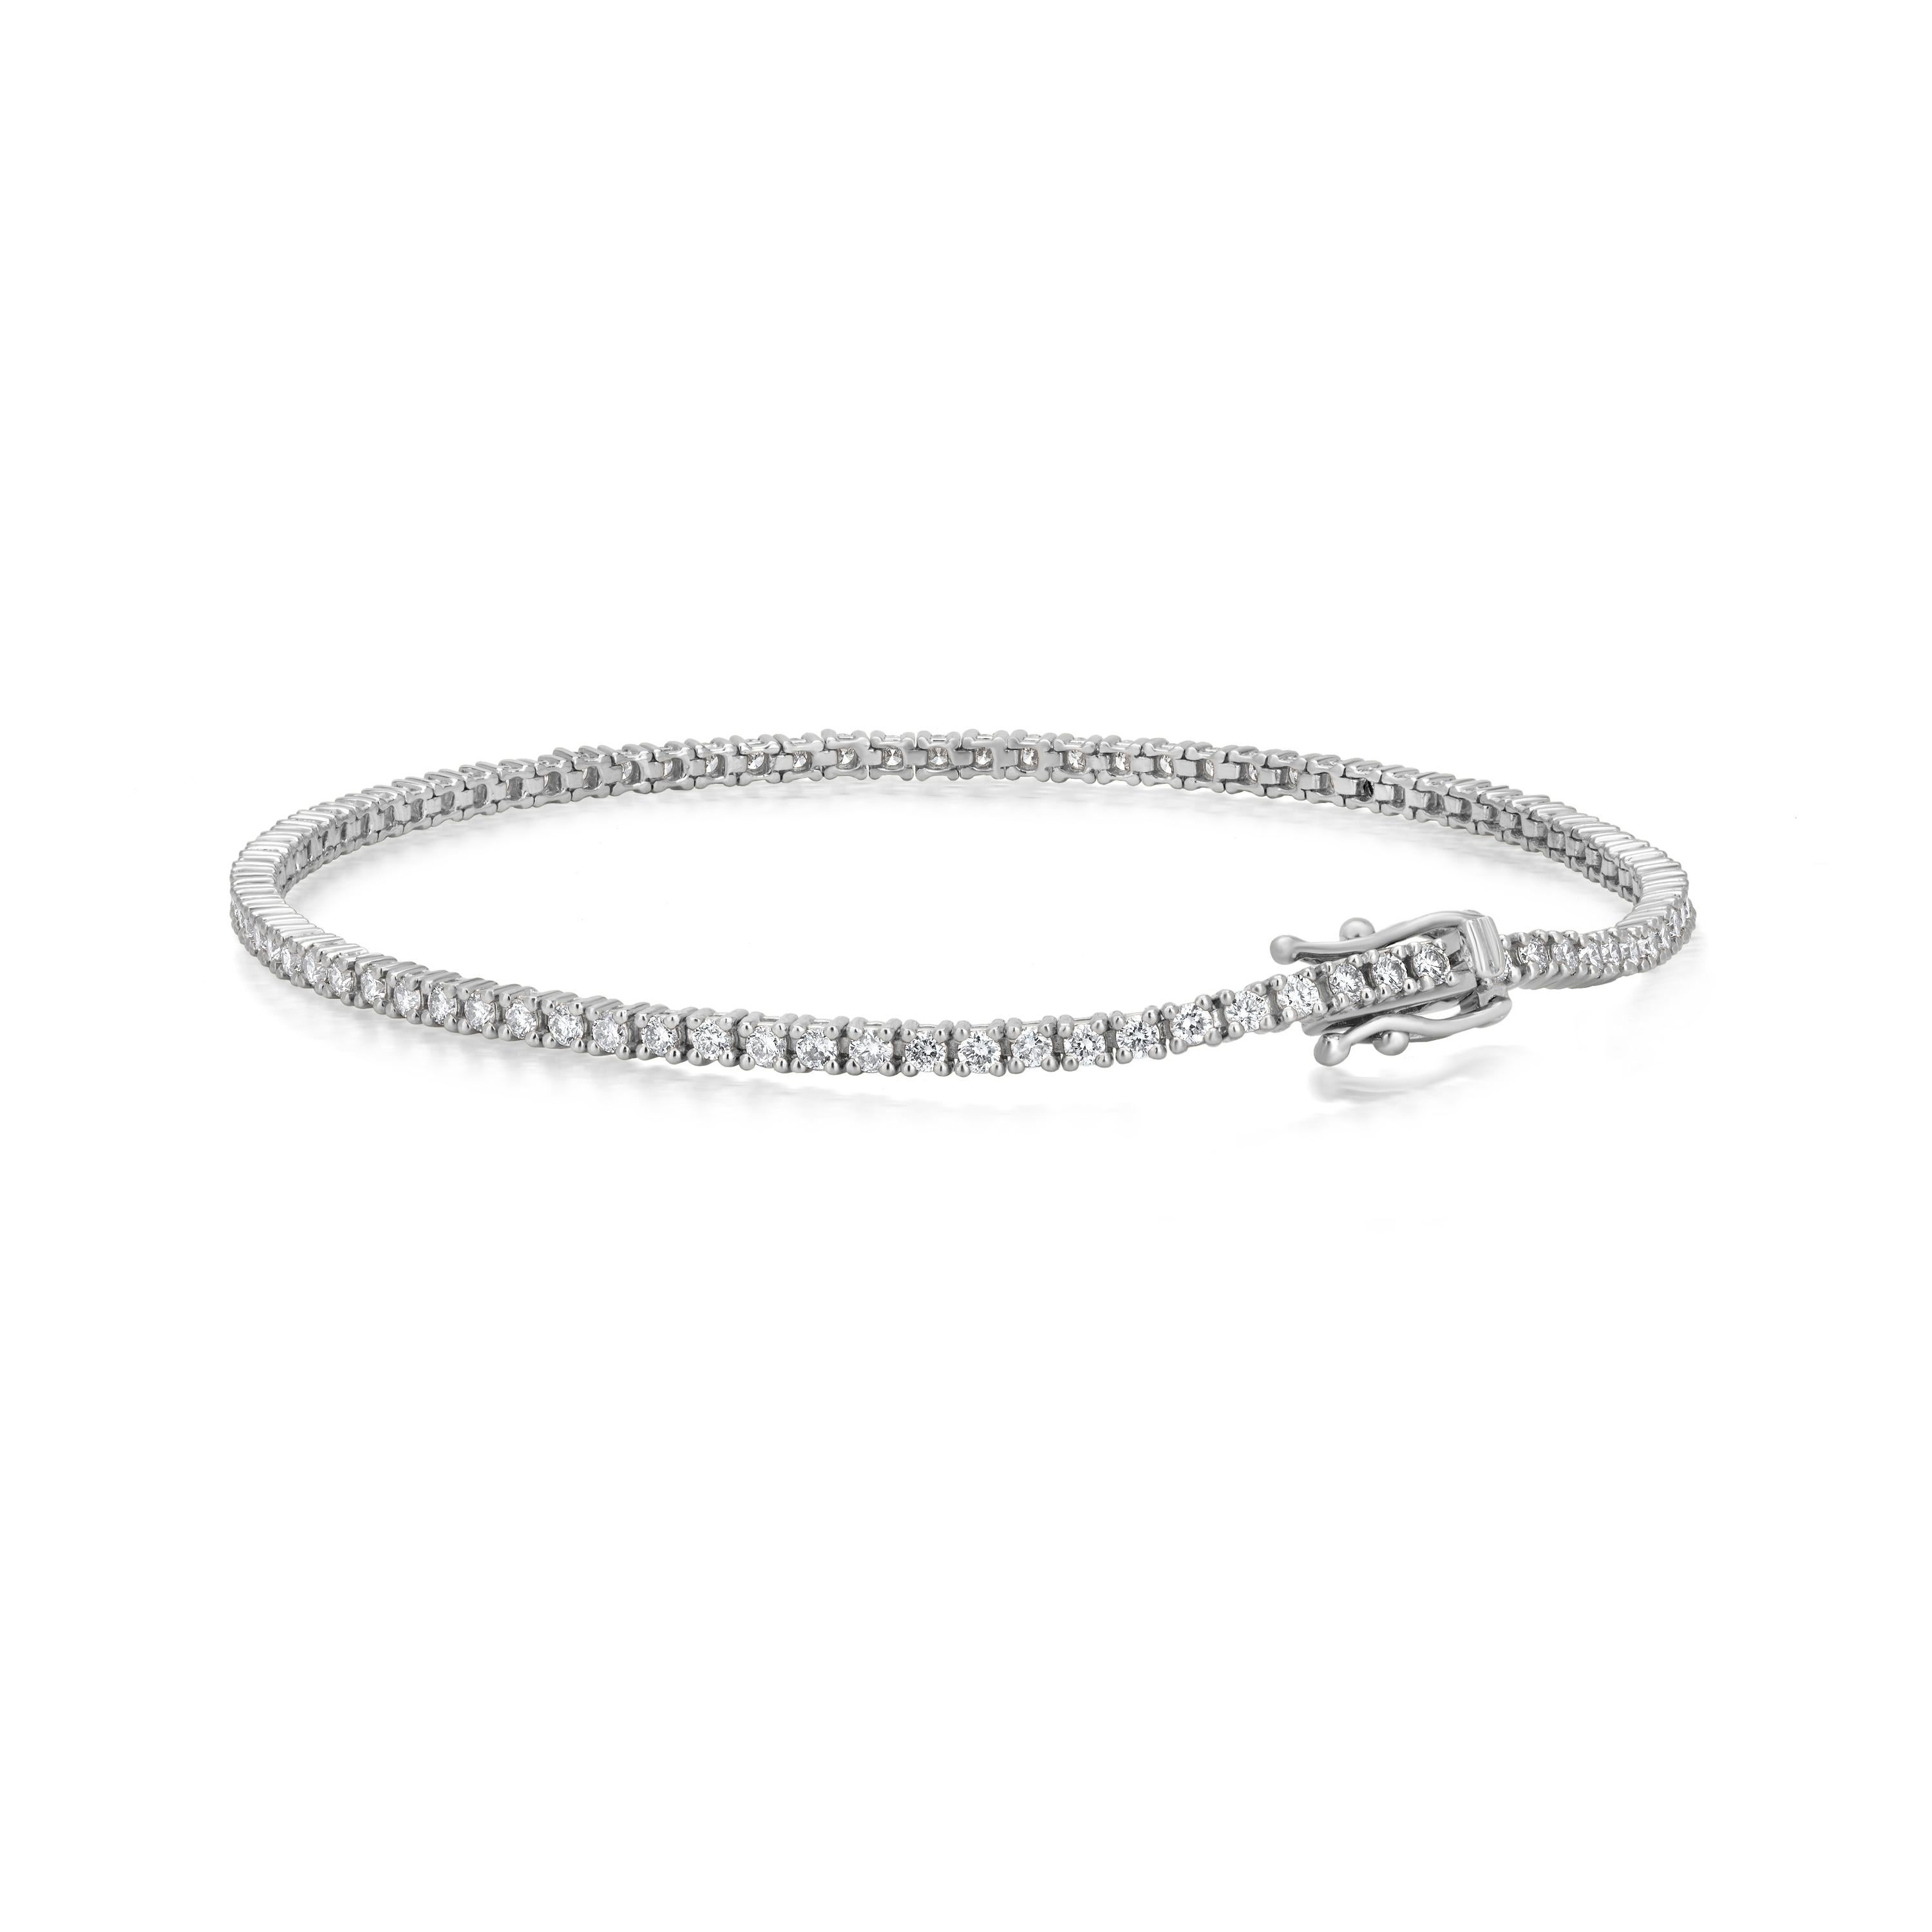 Manifested on an 18K White Gold body, this tennis bracelet is made up of sparkling white diamonds that are round full-cut, set in a prong. The diamonds weigh 1.6 Cts. The diamonds are I1 in clarity and GH in color. This sleek bracelet has an